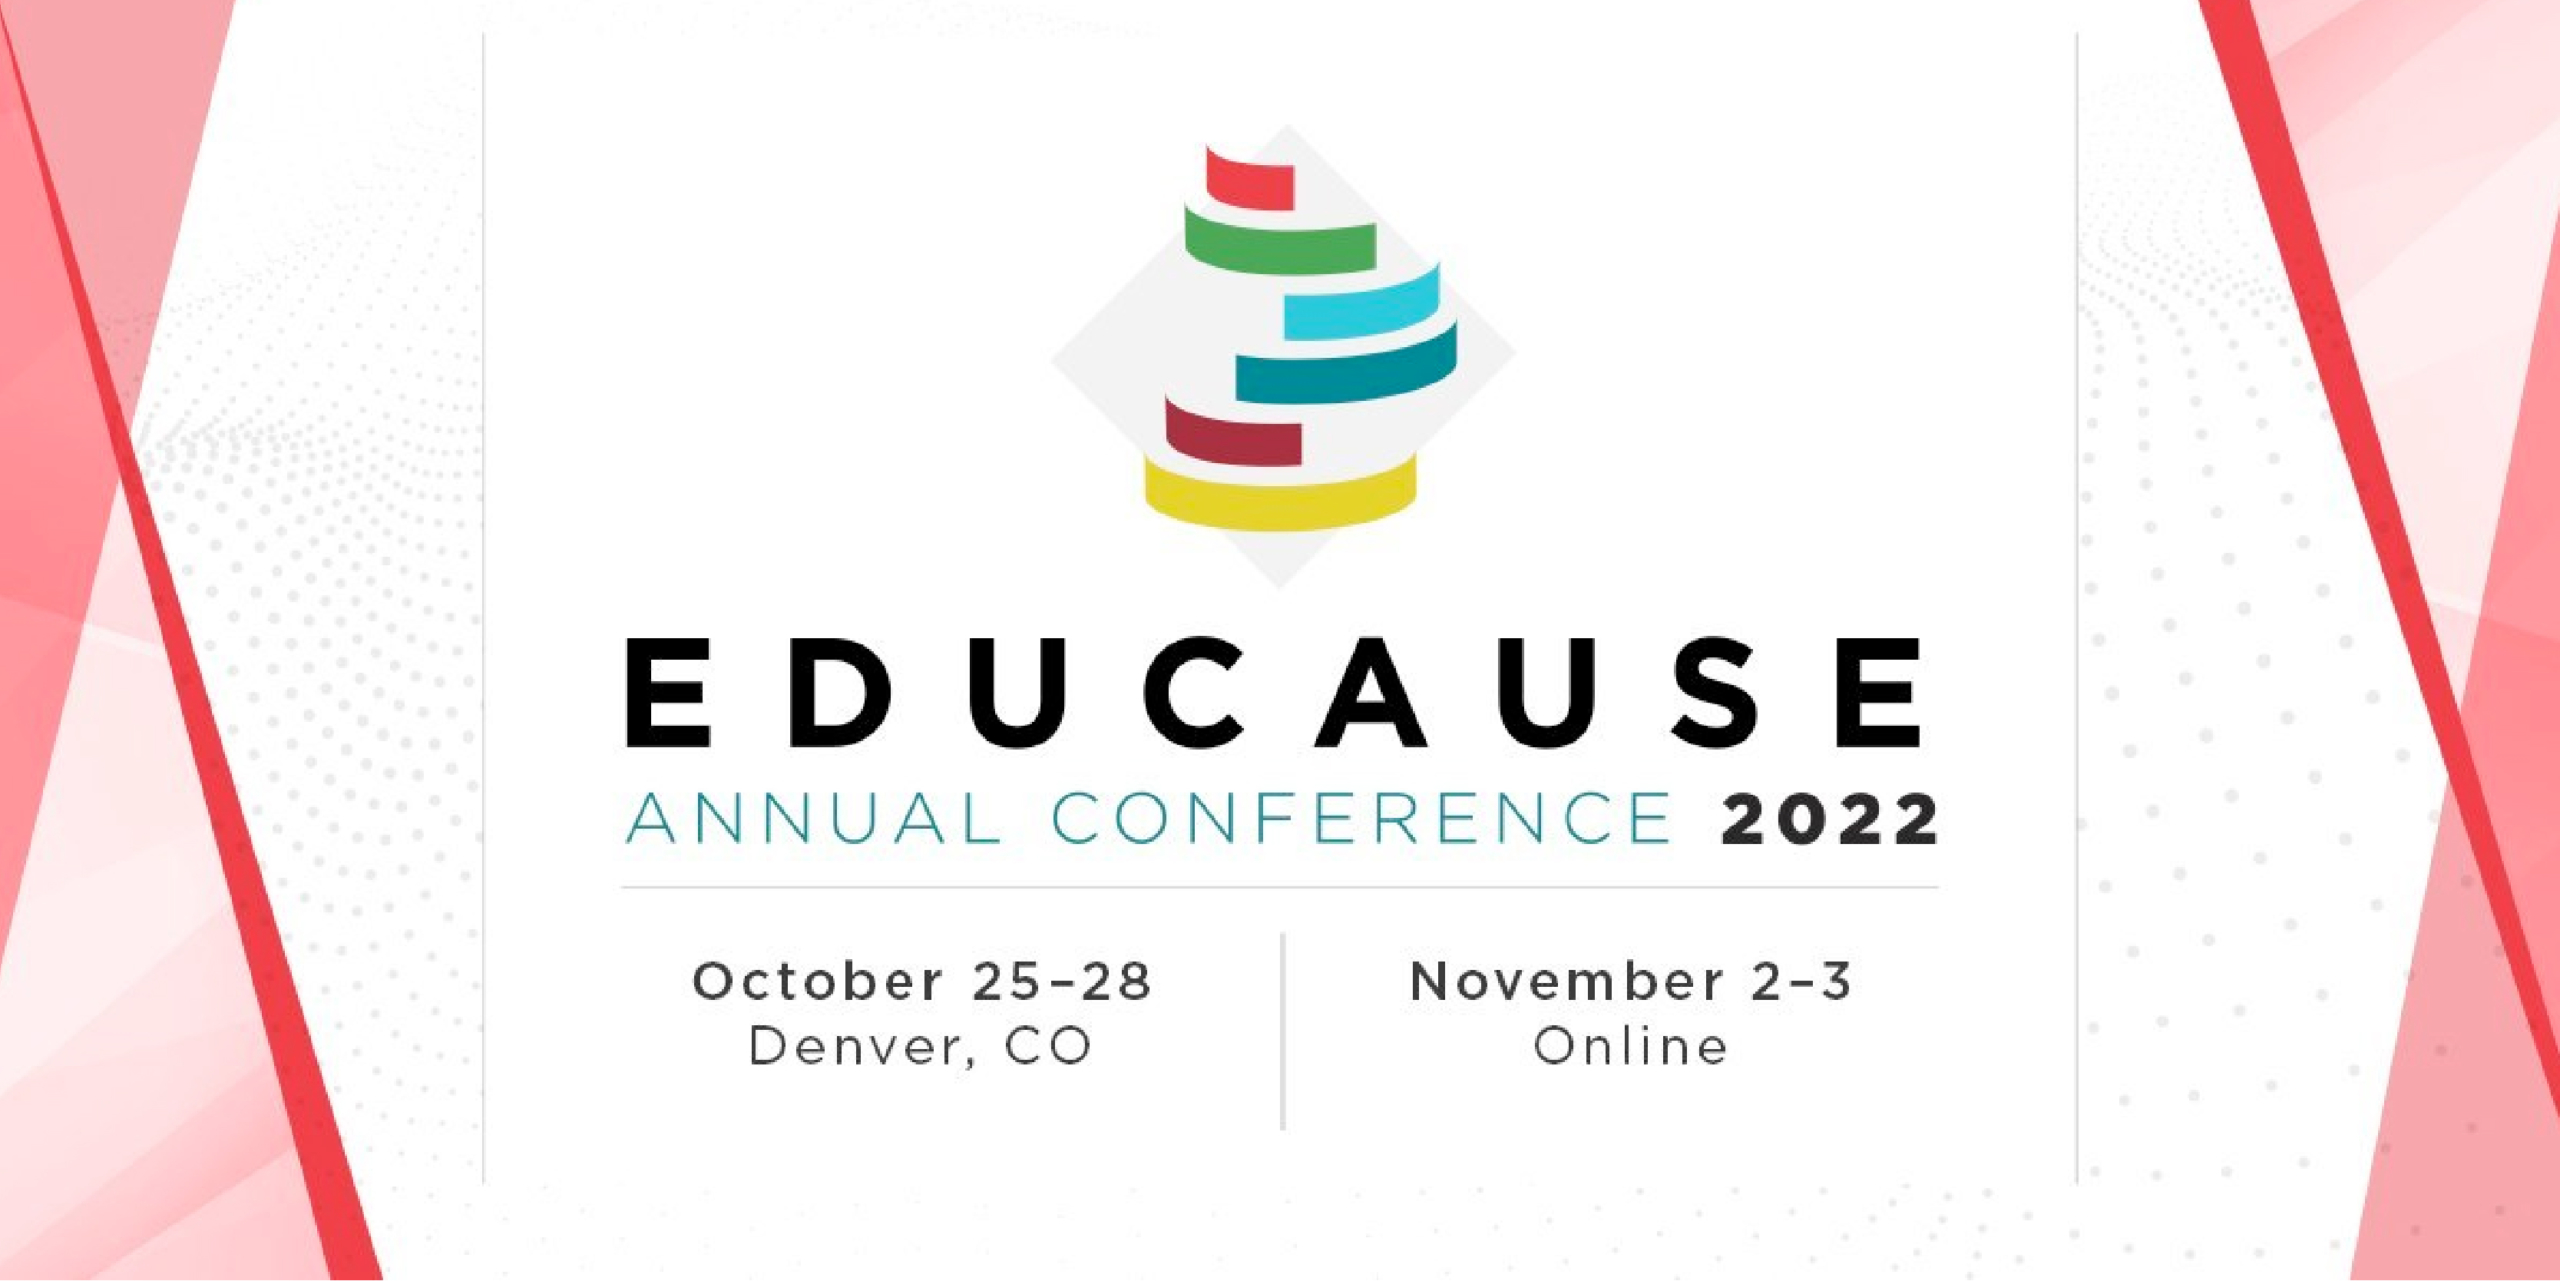 EDUCAUSE Annual Conference Liaison International